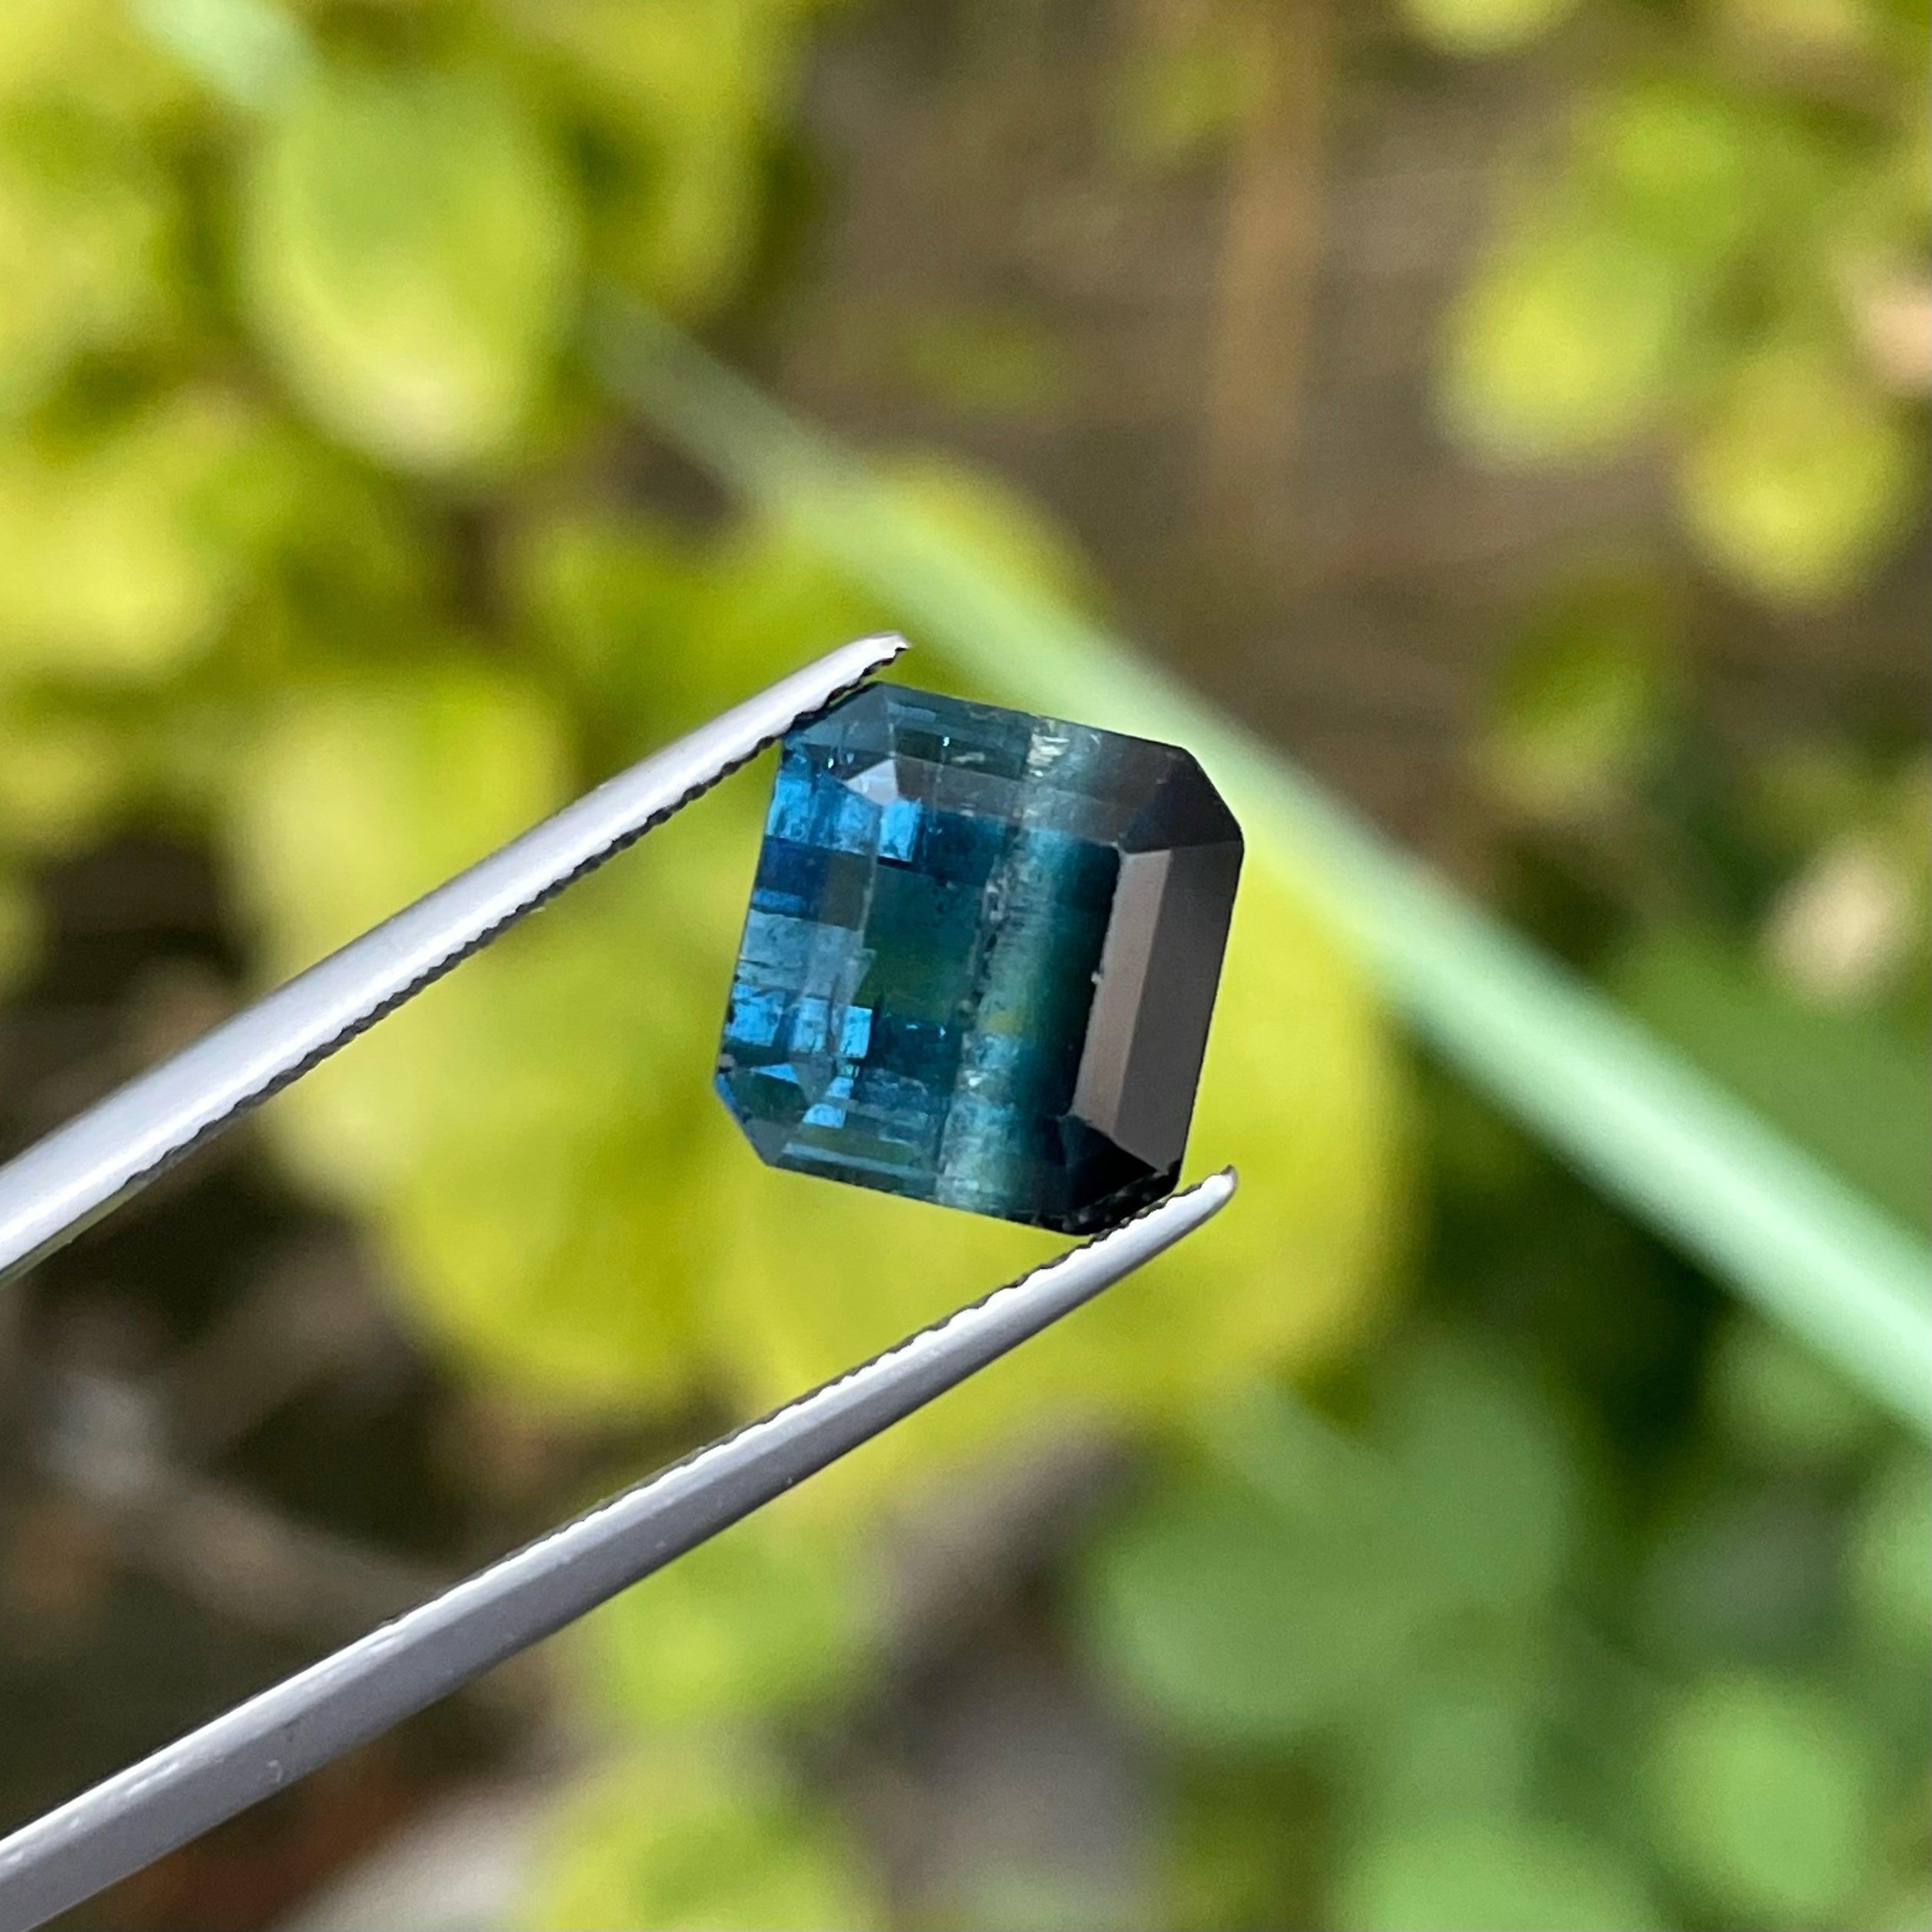 Pretty Bicolor Afghan Tourmaline Gemstone, Available For Sale At Wholesale Price Natural High Quality 6.20 Carats Included Clarity Natural Loose Tourmaline From Afghanistan.

GEMSTONE TYPE:	Pretty Bicolor Afghan Tourmaline Gemstone
WEIGHT:	6.20